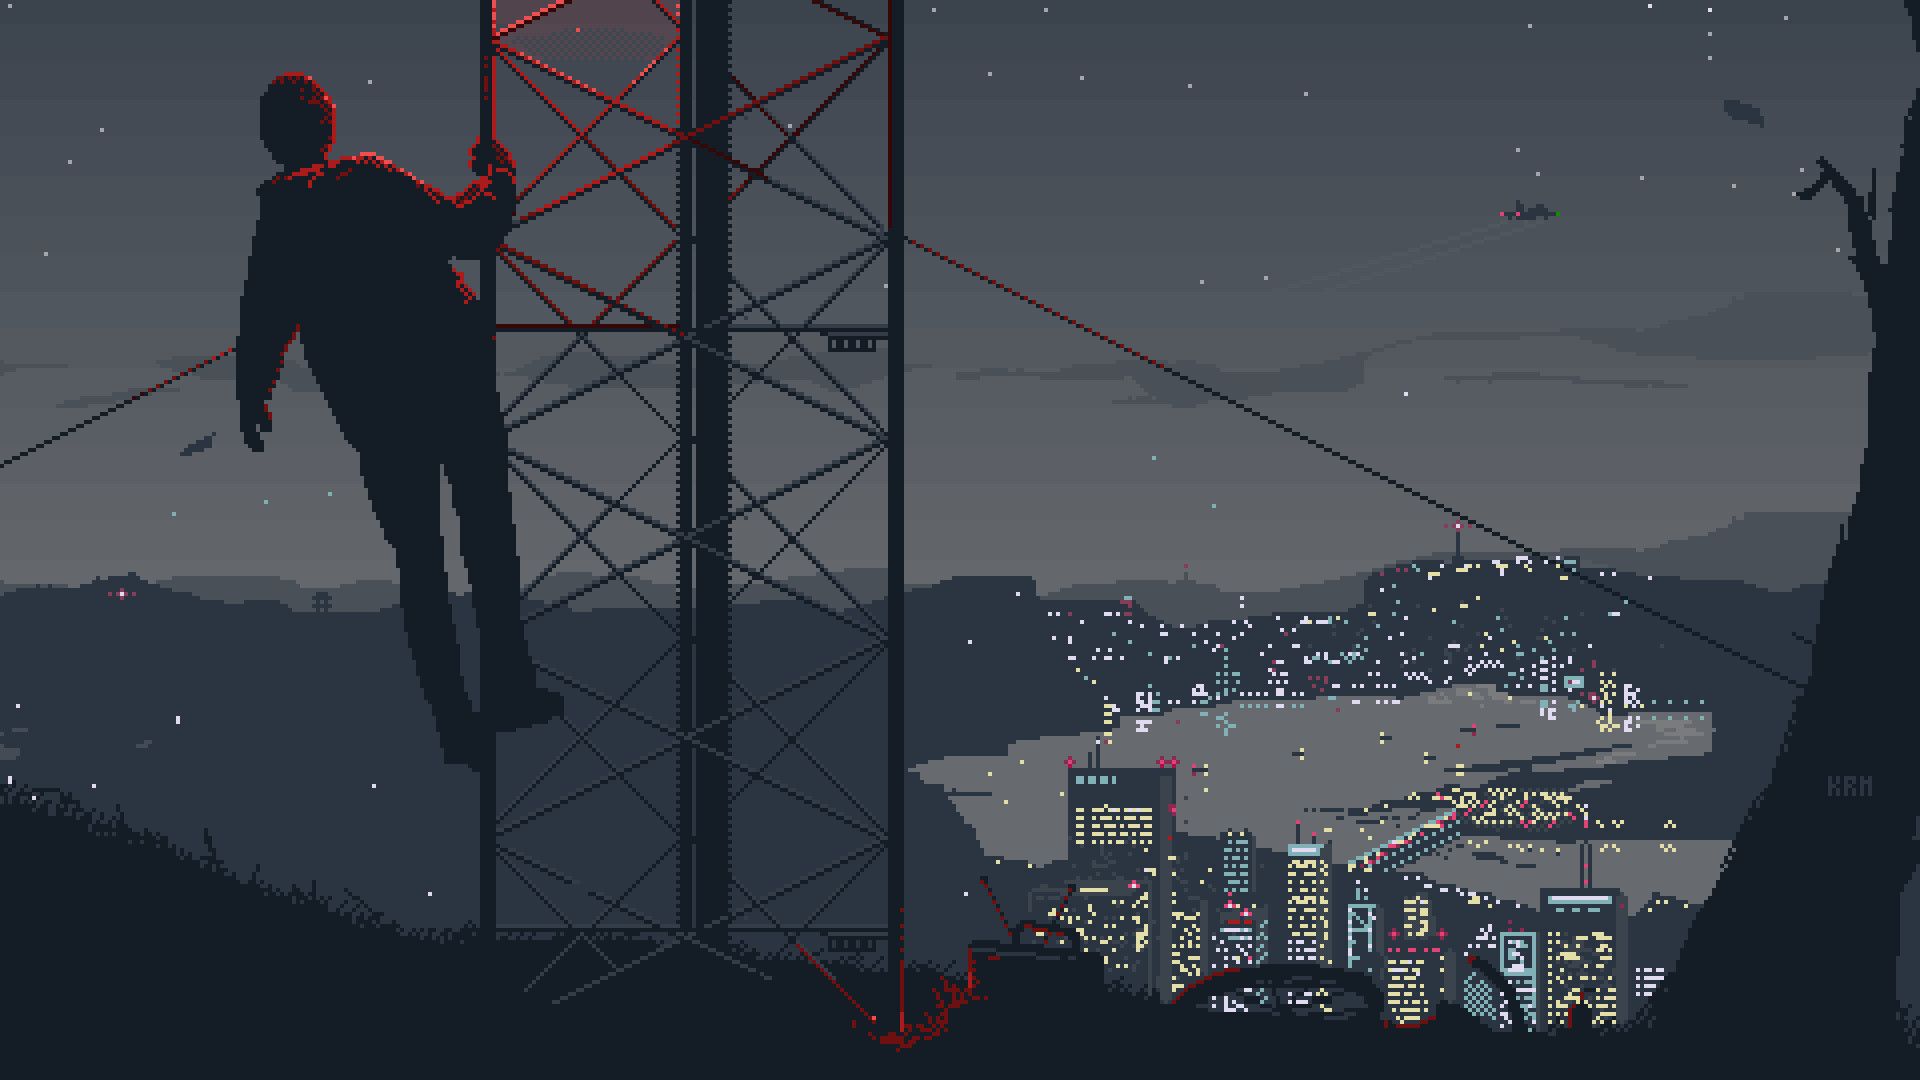 A pixelated image of a man hanging from a power line. - Pixel art, art